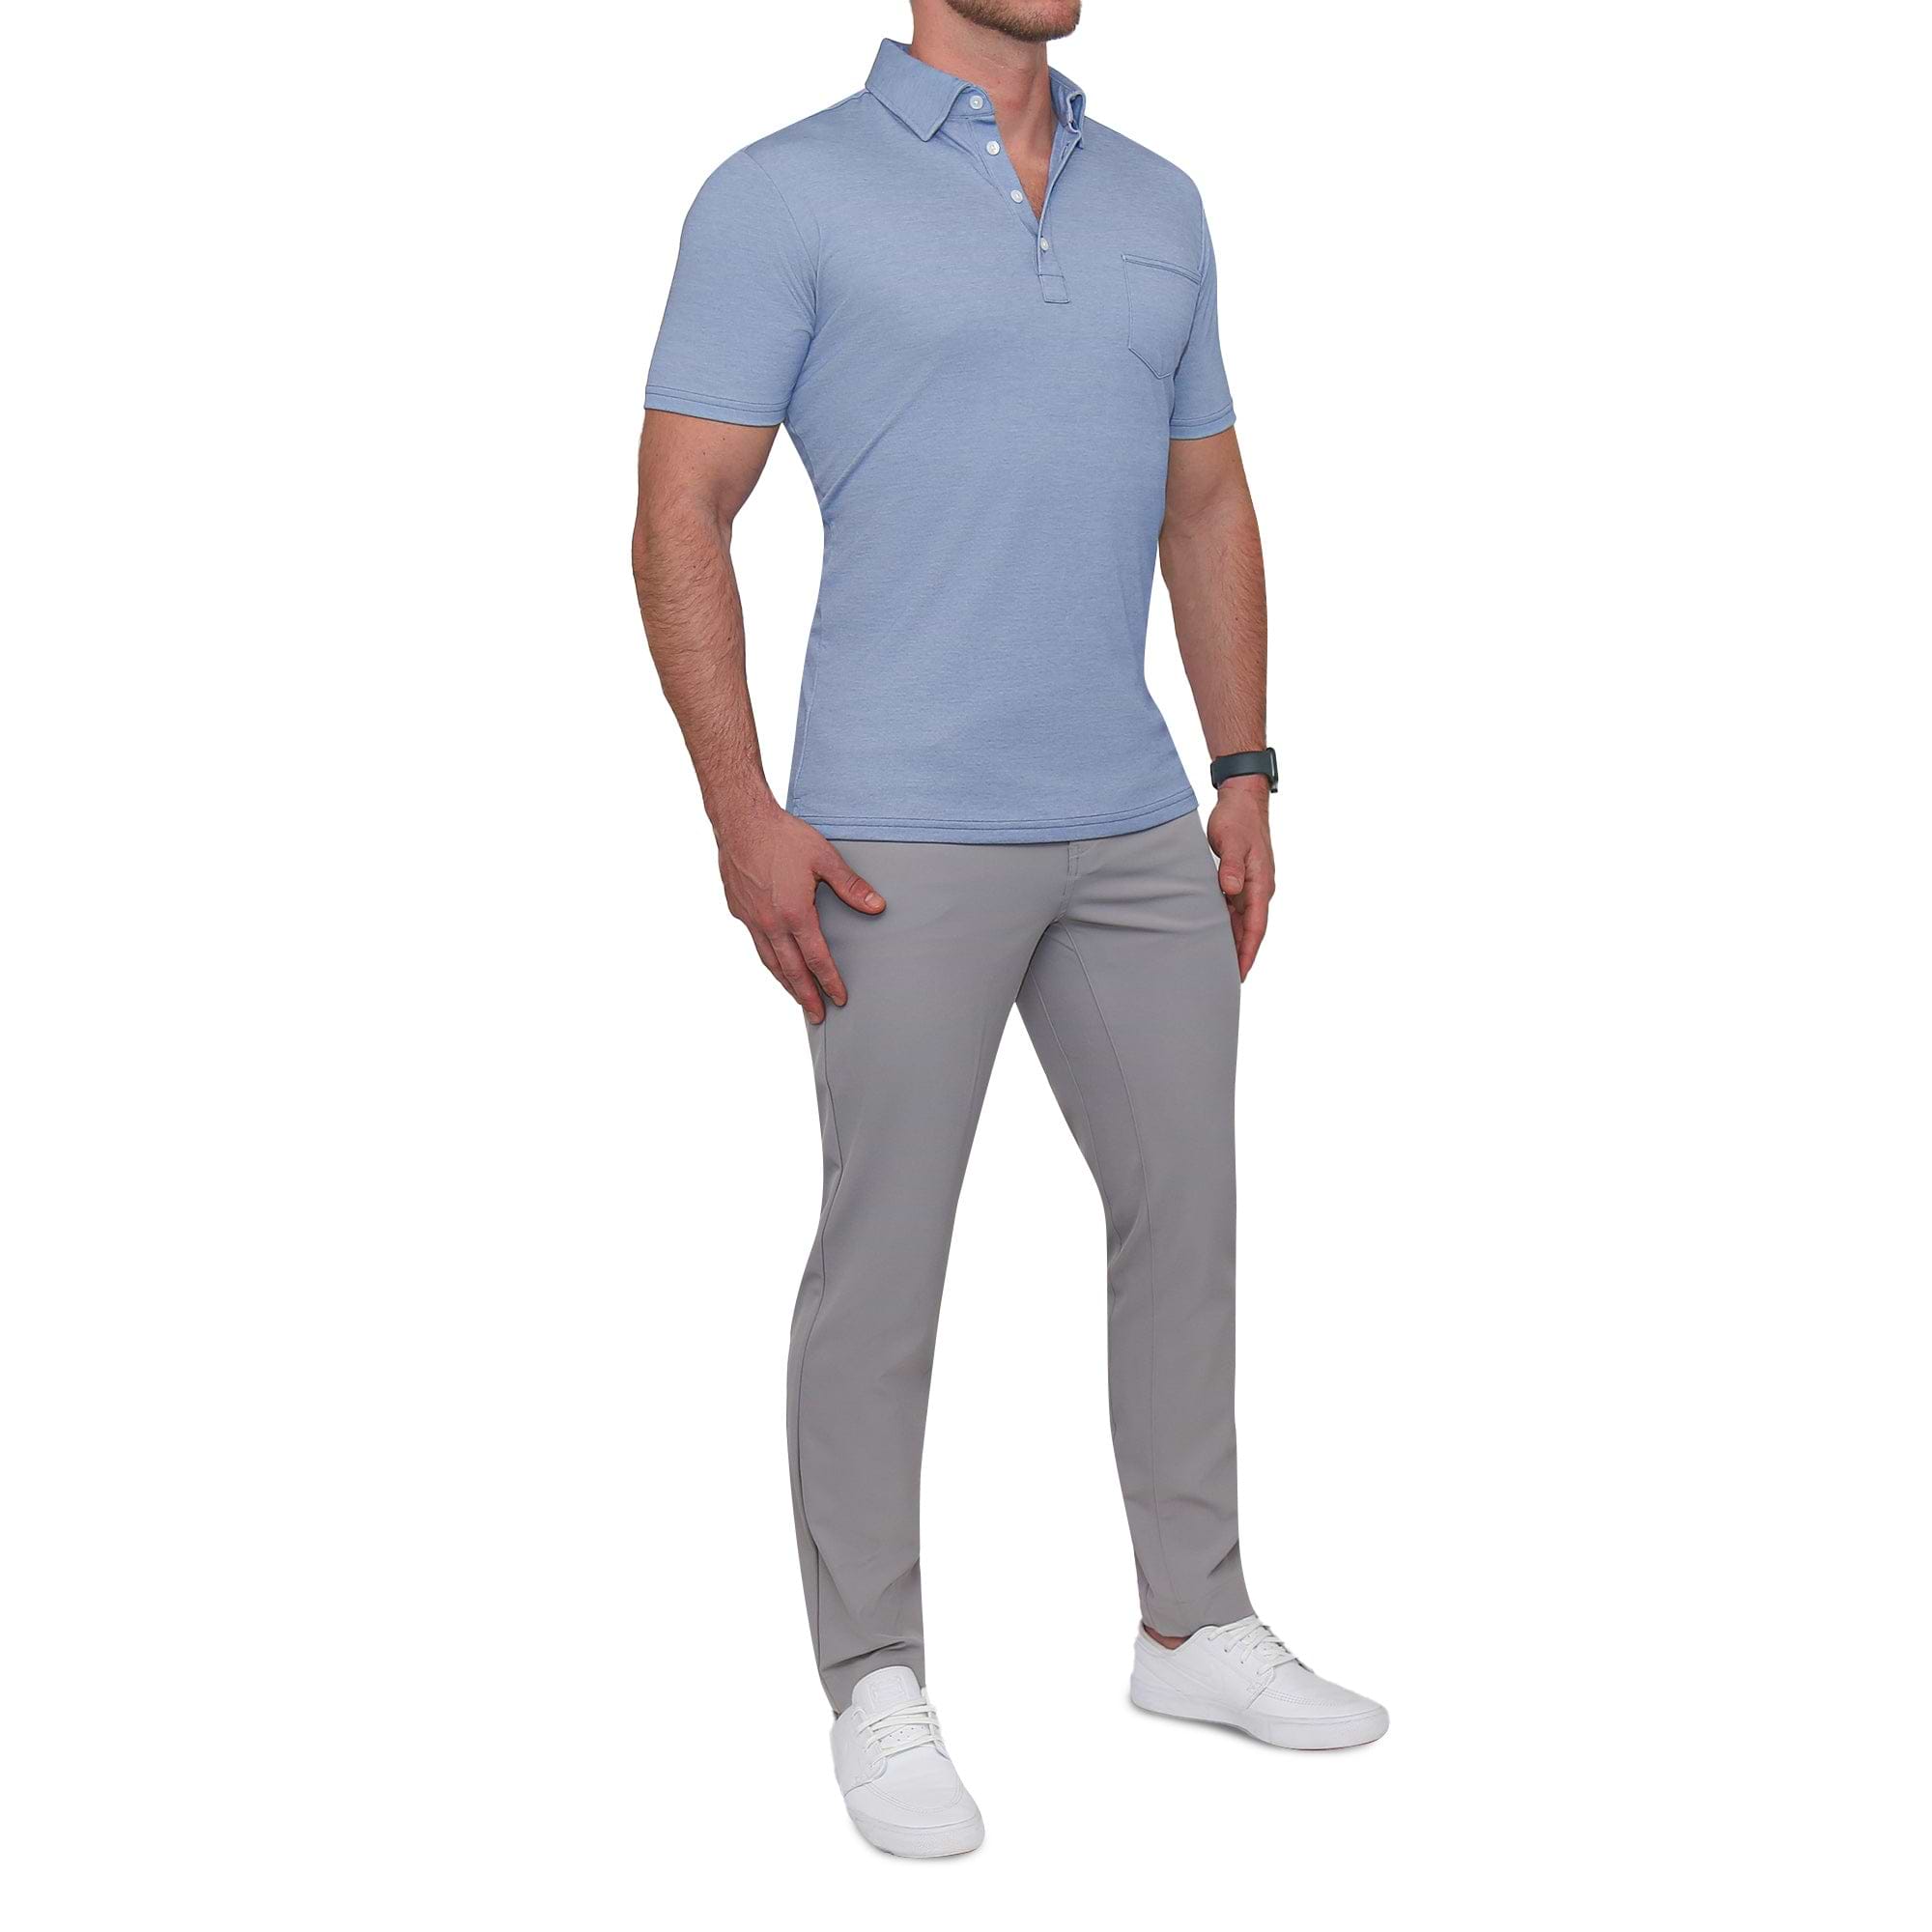 Grey Pants with Blue Shirt Outfits For Men (500+ ideas & outfits) |  Lookastic